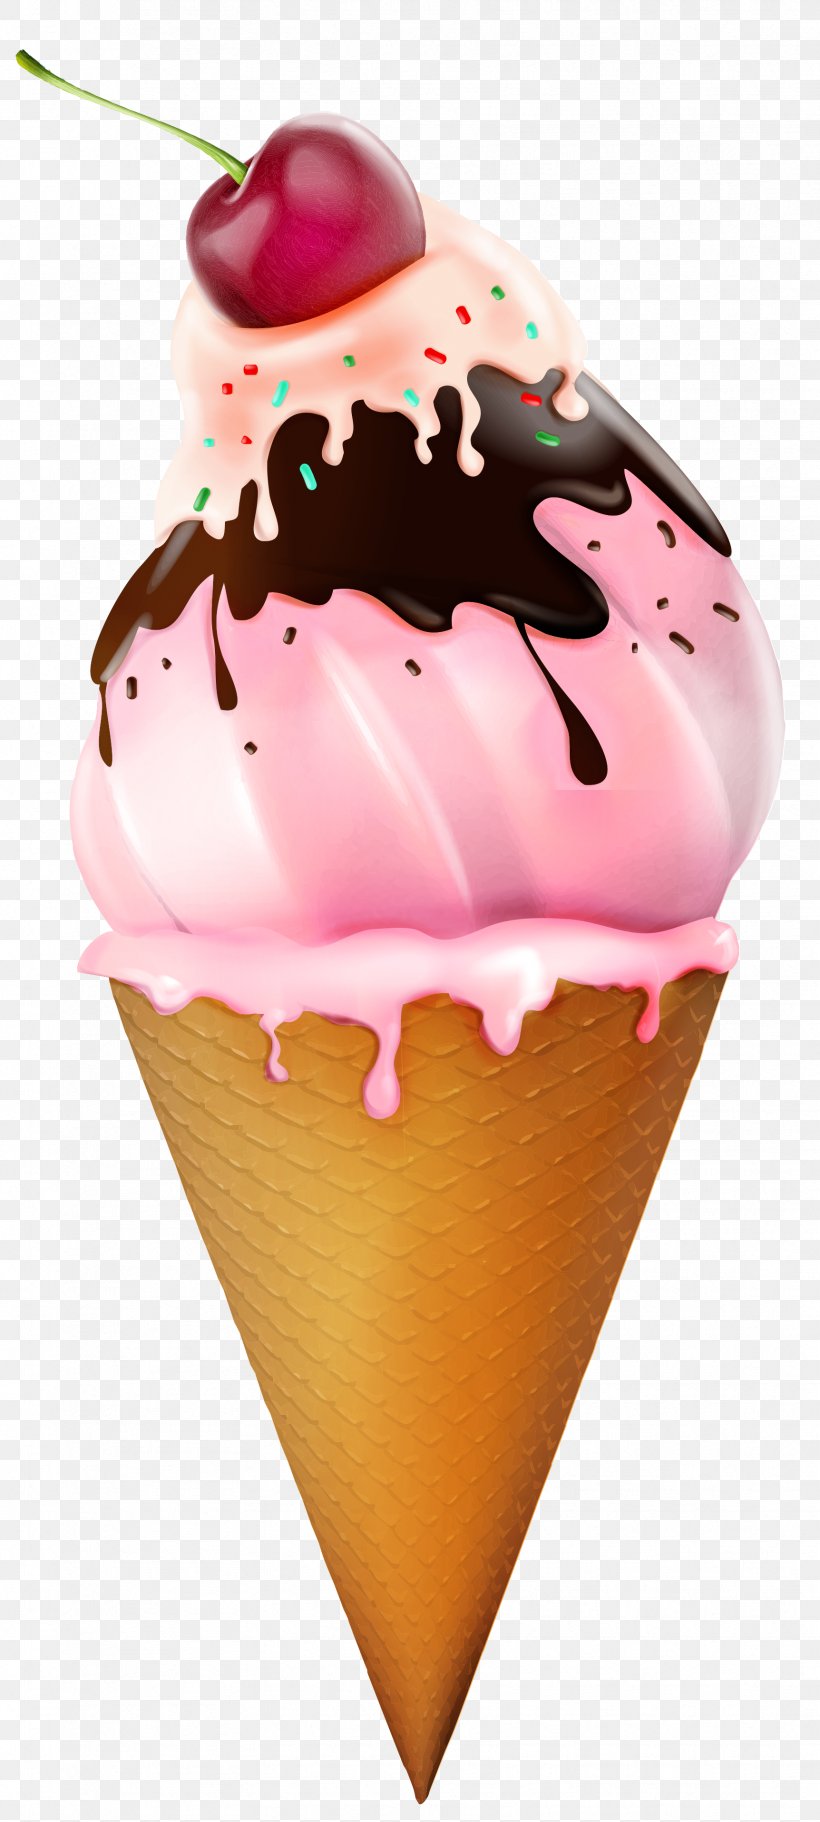 Ice Cream Cone Sundae Clip Art, PNG, 1724x3831px, Ice Cream, Chocolate, Chocolate Cake, Chocolate Ice Cream, Cream Download Free